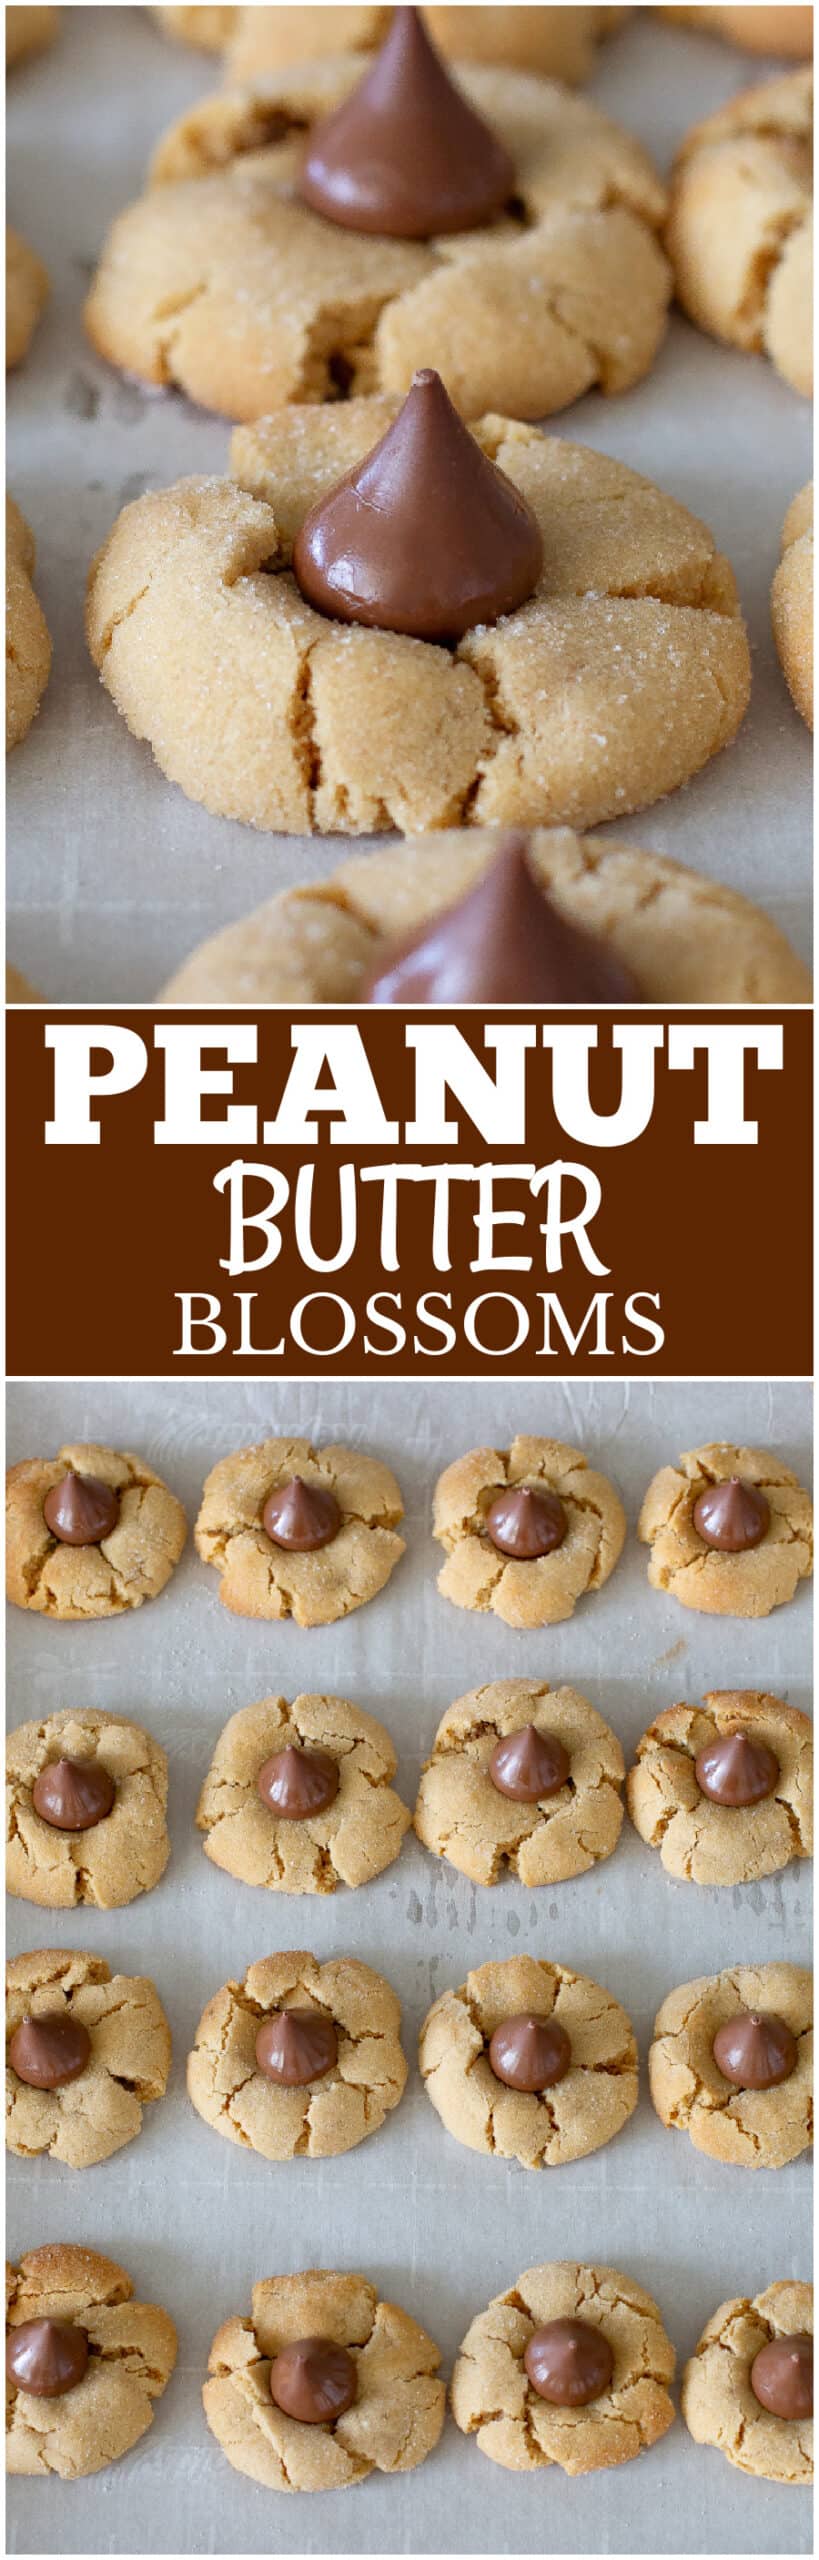 peanut butter blossoms scaled - Peanut Butter Blossoms